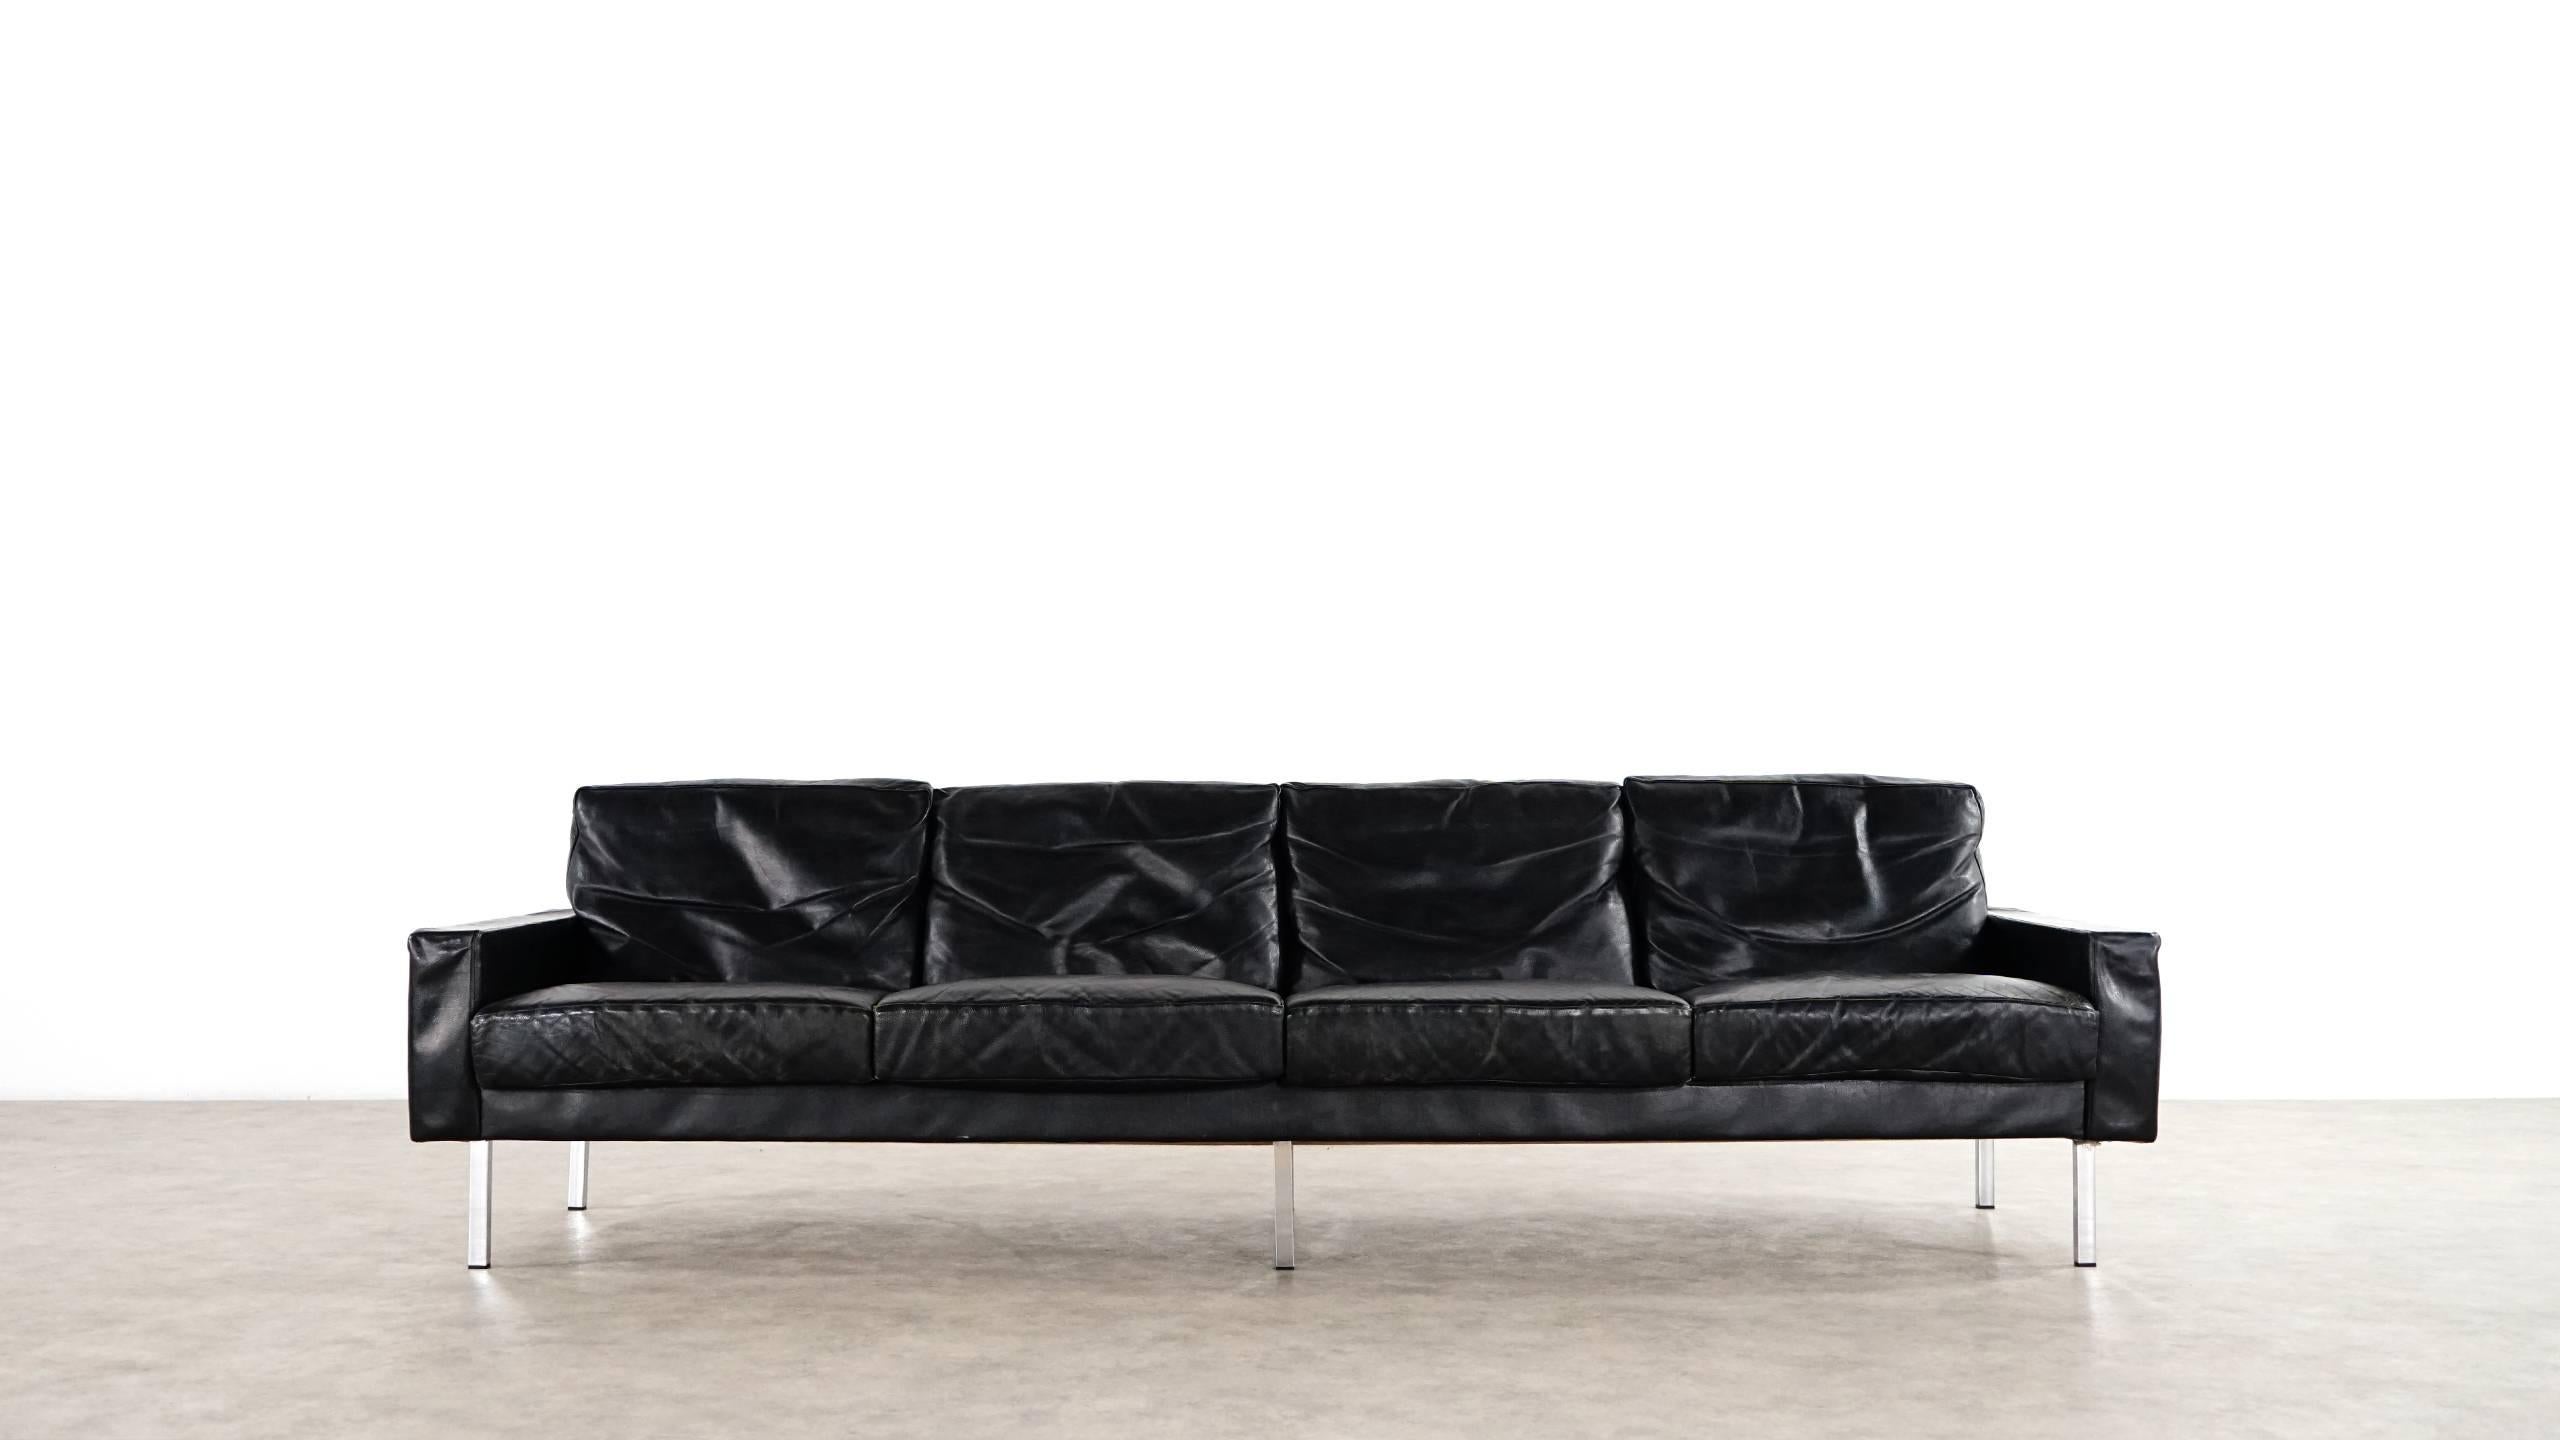 Mid-Century Modern George Nelson Loose Cushion Four-Seat Leather Sofa, 1962 by Herman Miller